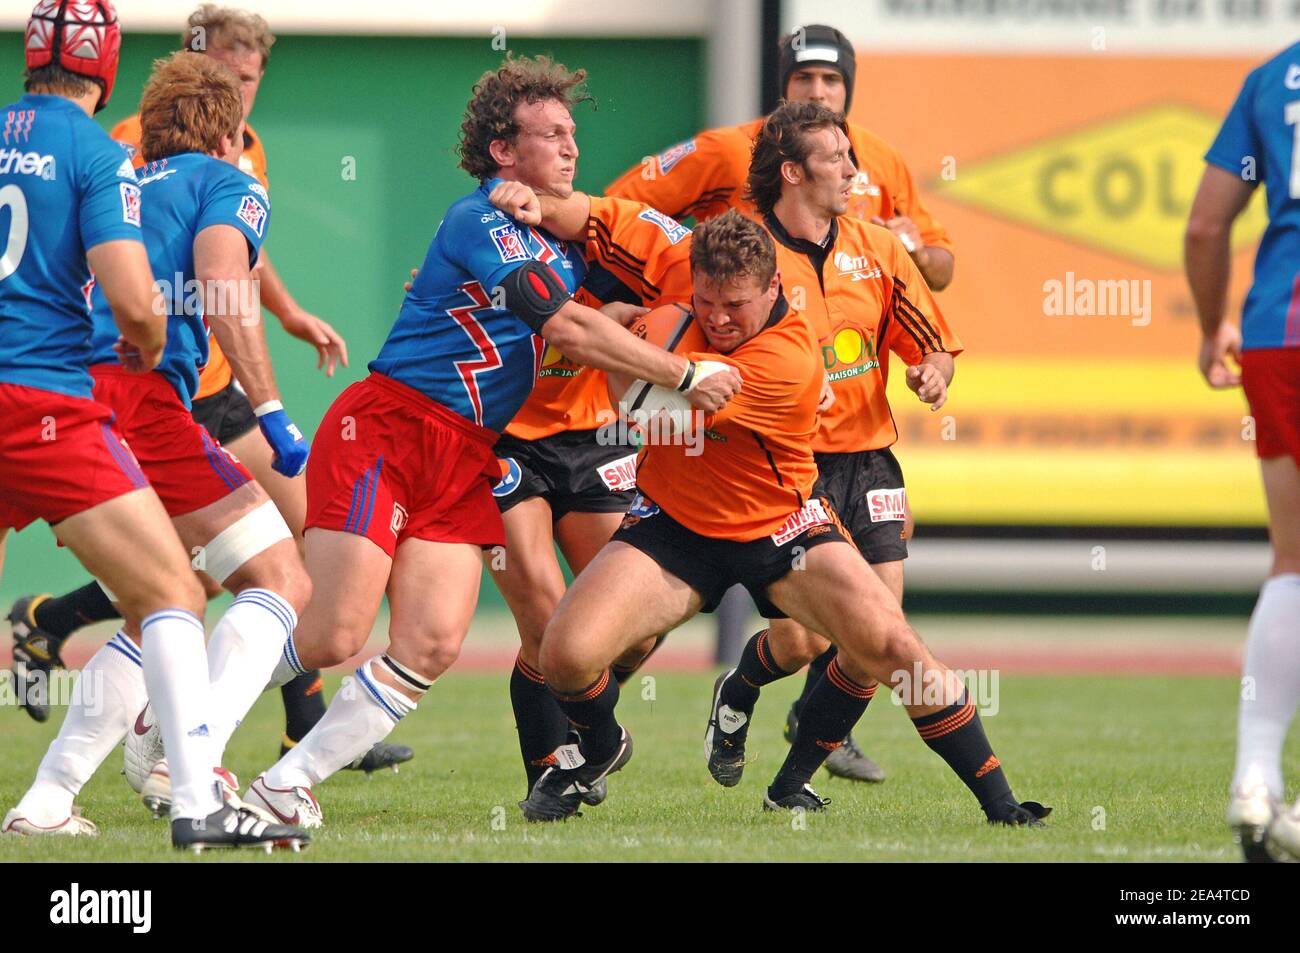 Narbonne rugby team against Stade Francais rugby team during the first day  of the TOP 14 match, Racing club Narbonne Mediterrannee won 26/20 against  Stade Francais, in Narbonne, South of France, on